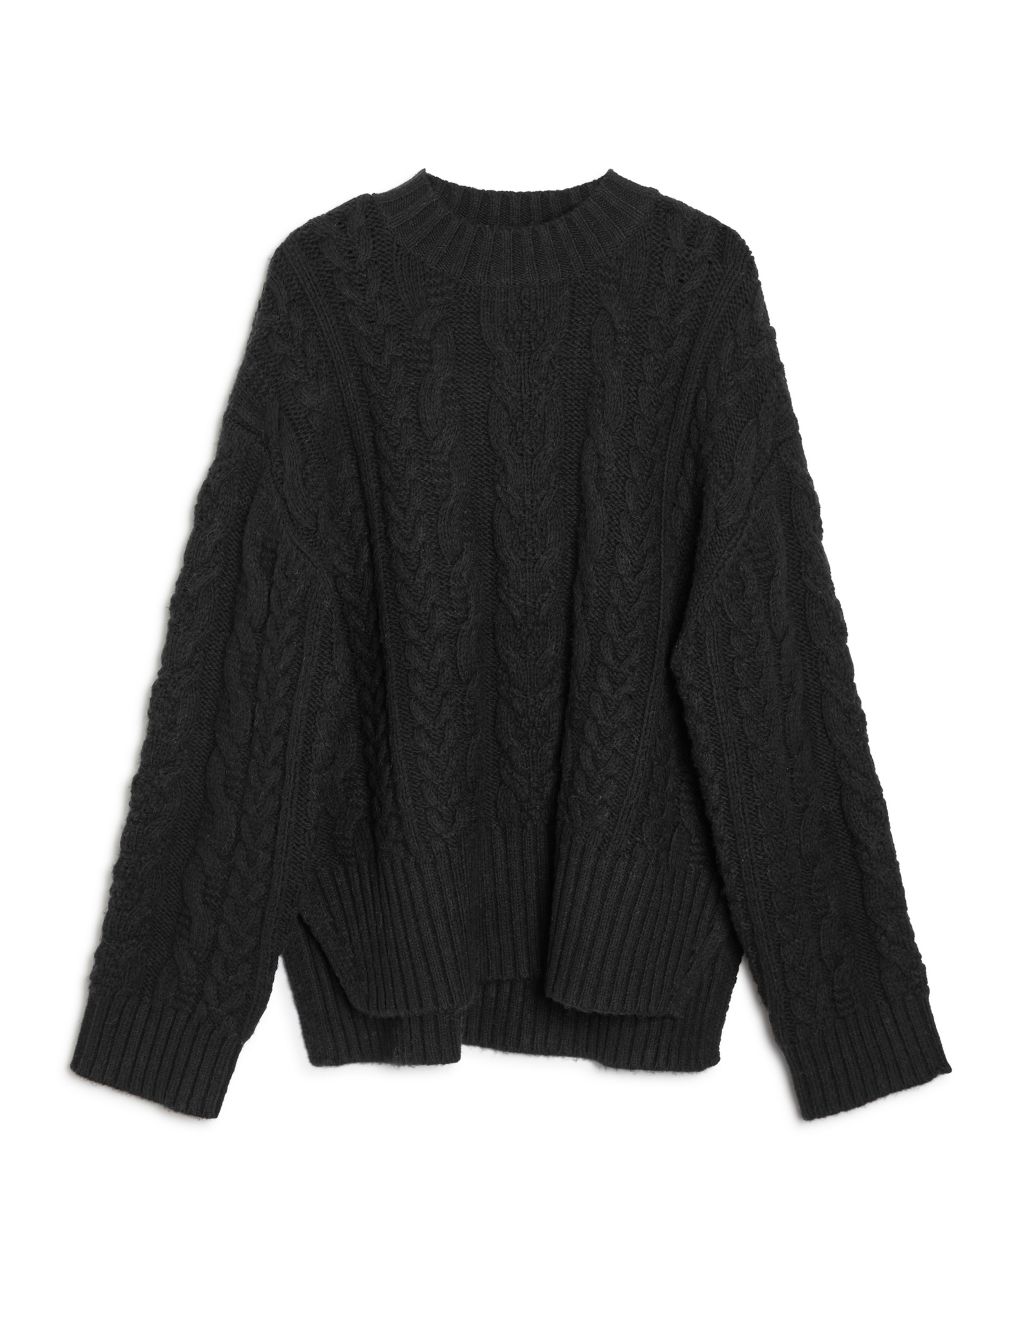 Cable Knit Crew Neck Jumper image 2